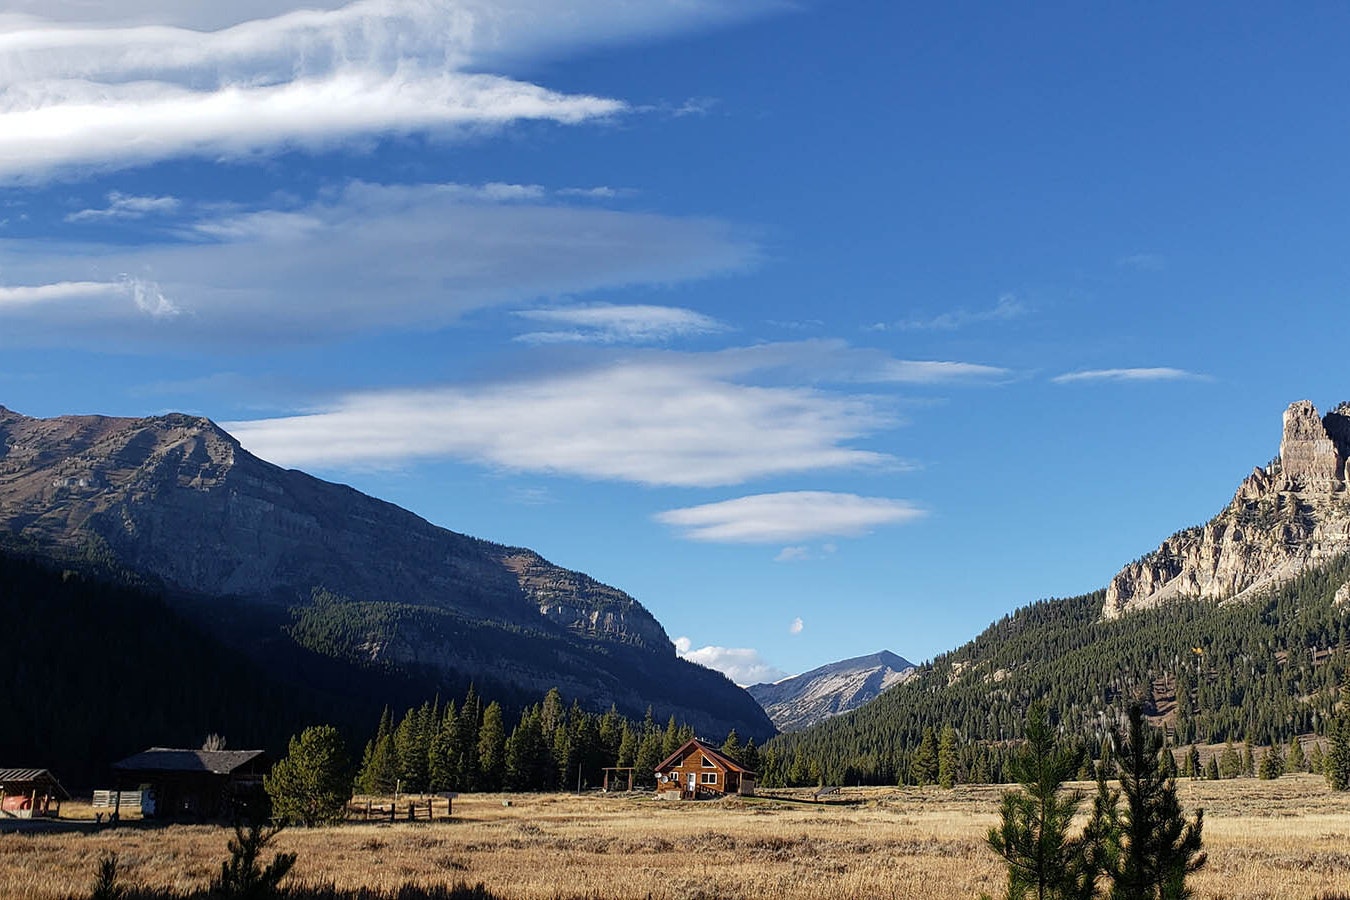 The view is amazing at Granite Creek Ranch. The caretakers' residence appears small beside the mountains.